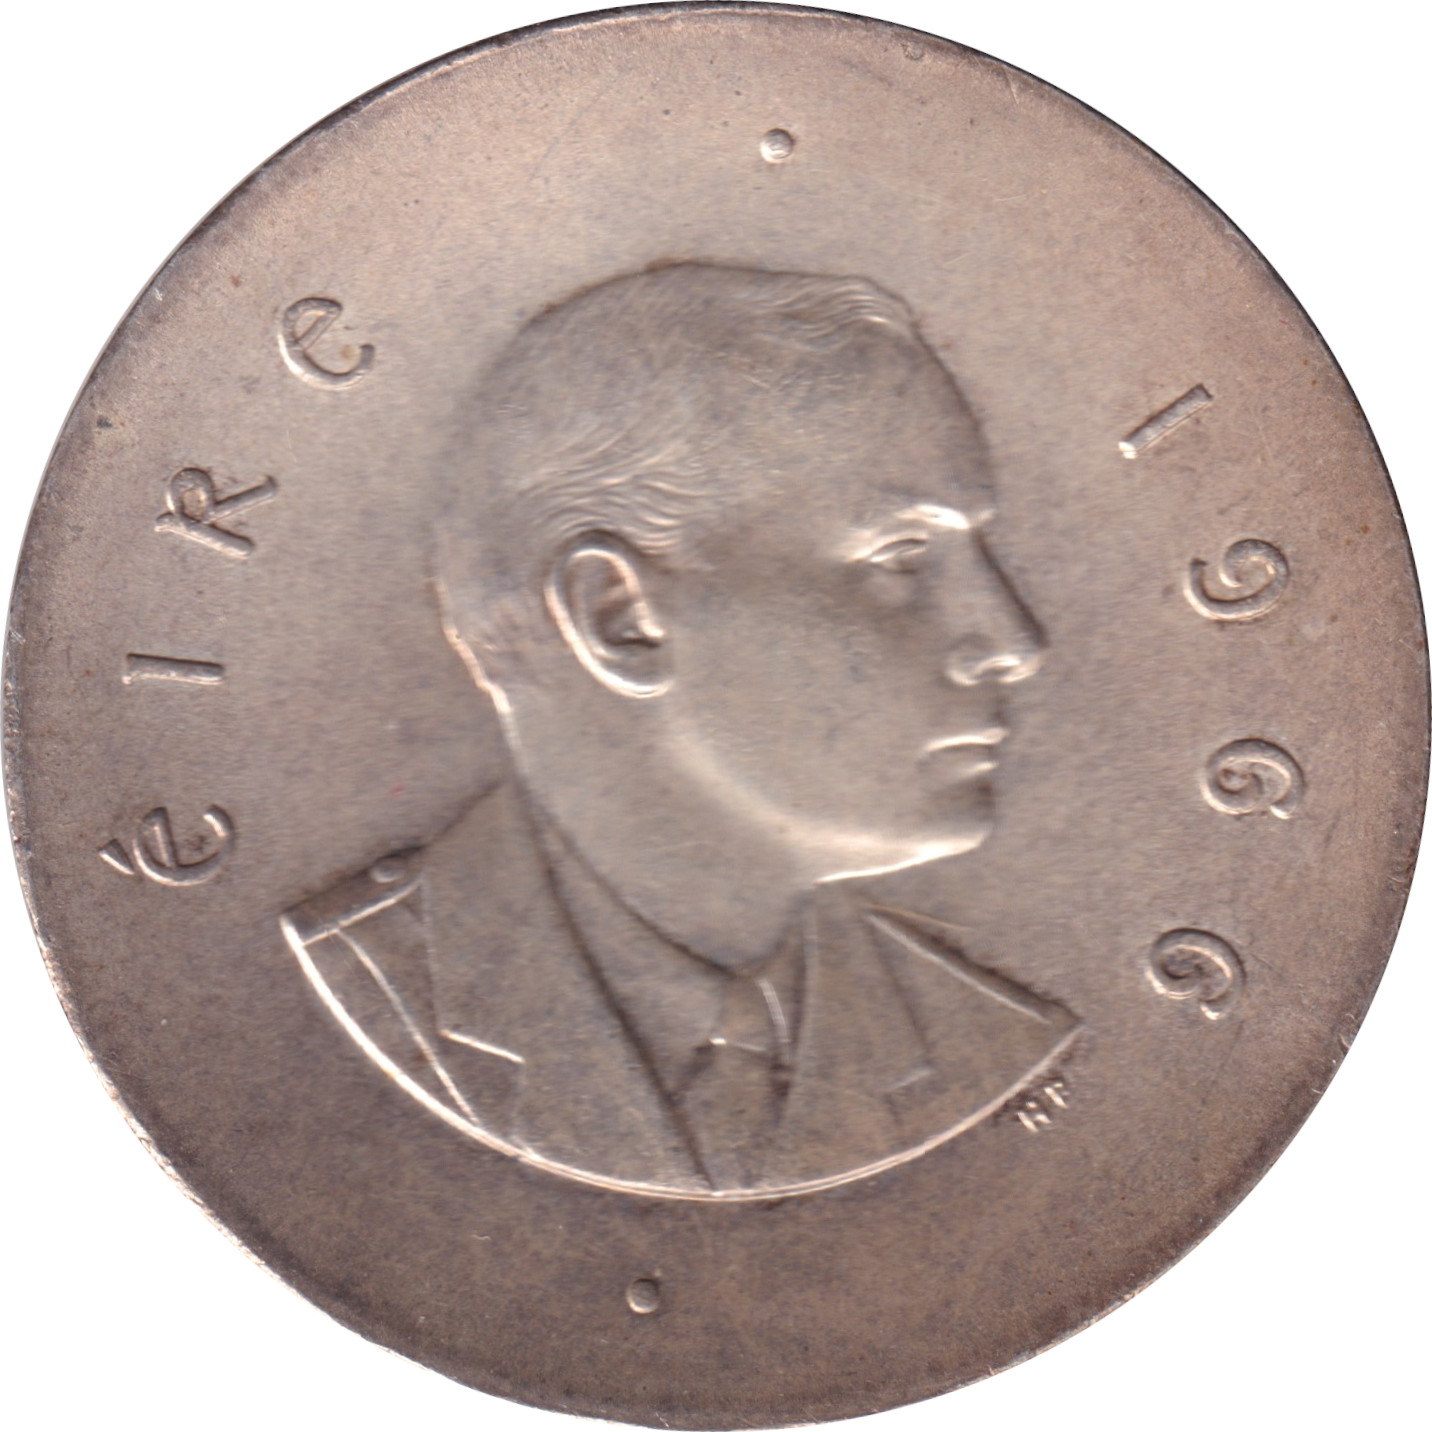 10 shilling - Indépendance - 50 years